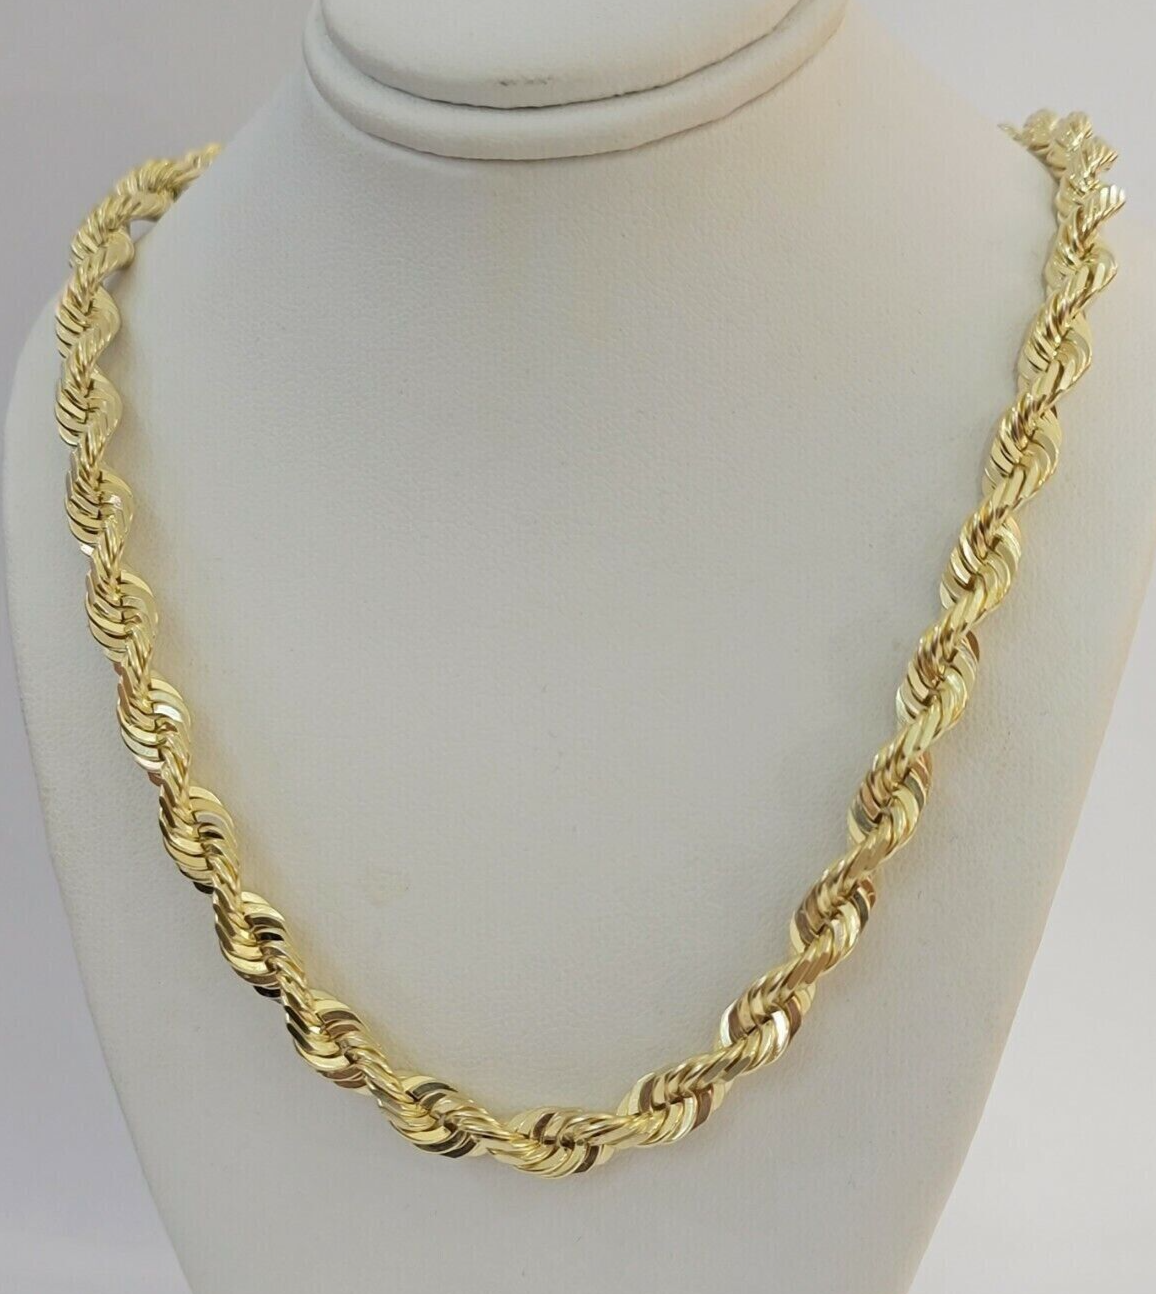 7mm Rope chain Necklace Solid 10k Yellow Gold Diamond cut 26" GURANTEED 10K GOLD